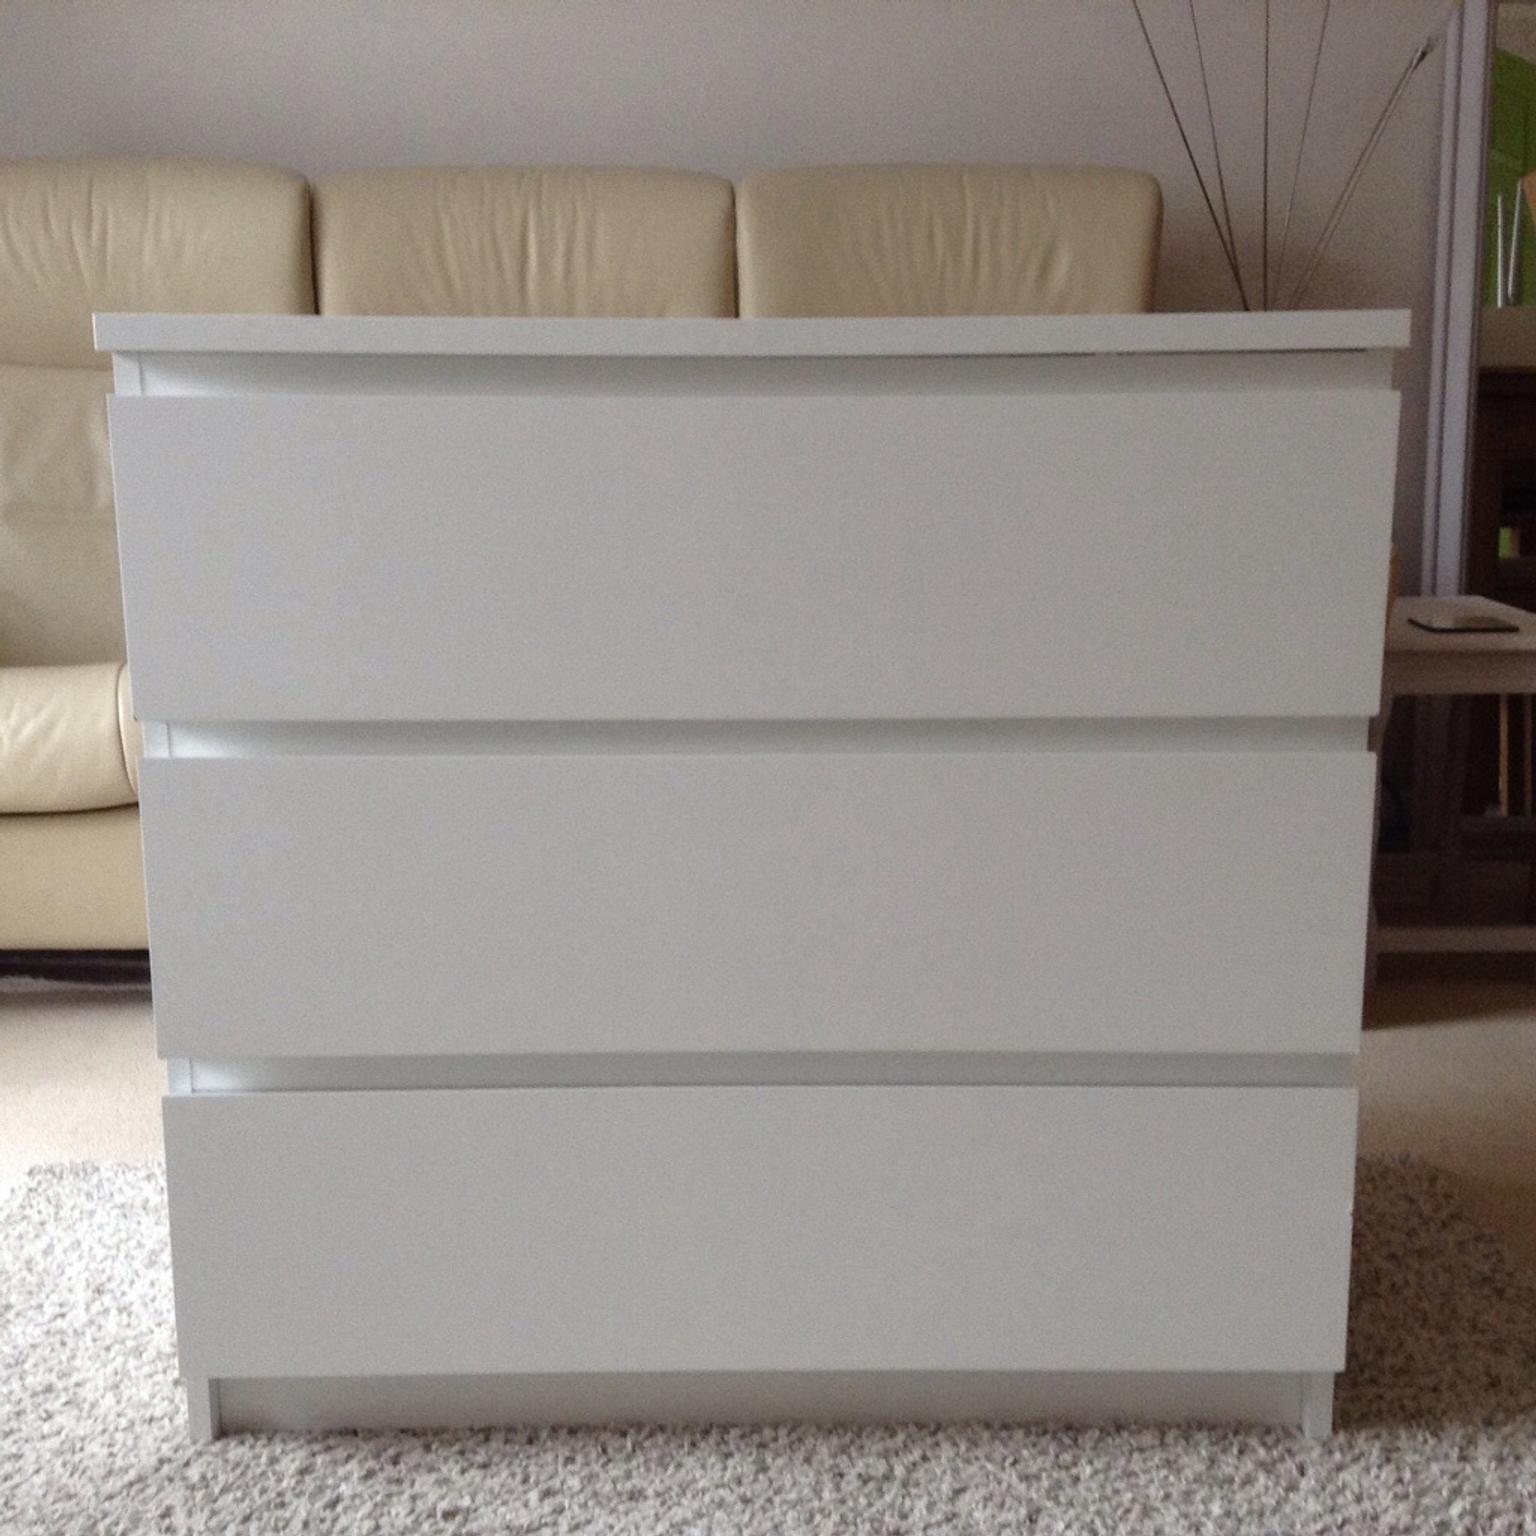 Ikea Malmo Three Drawer Chest In Mk19 Deanshanger For 10 00 For